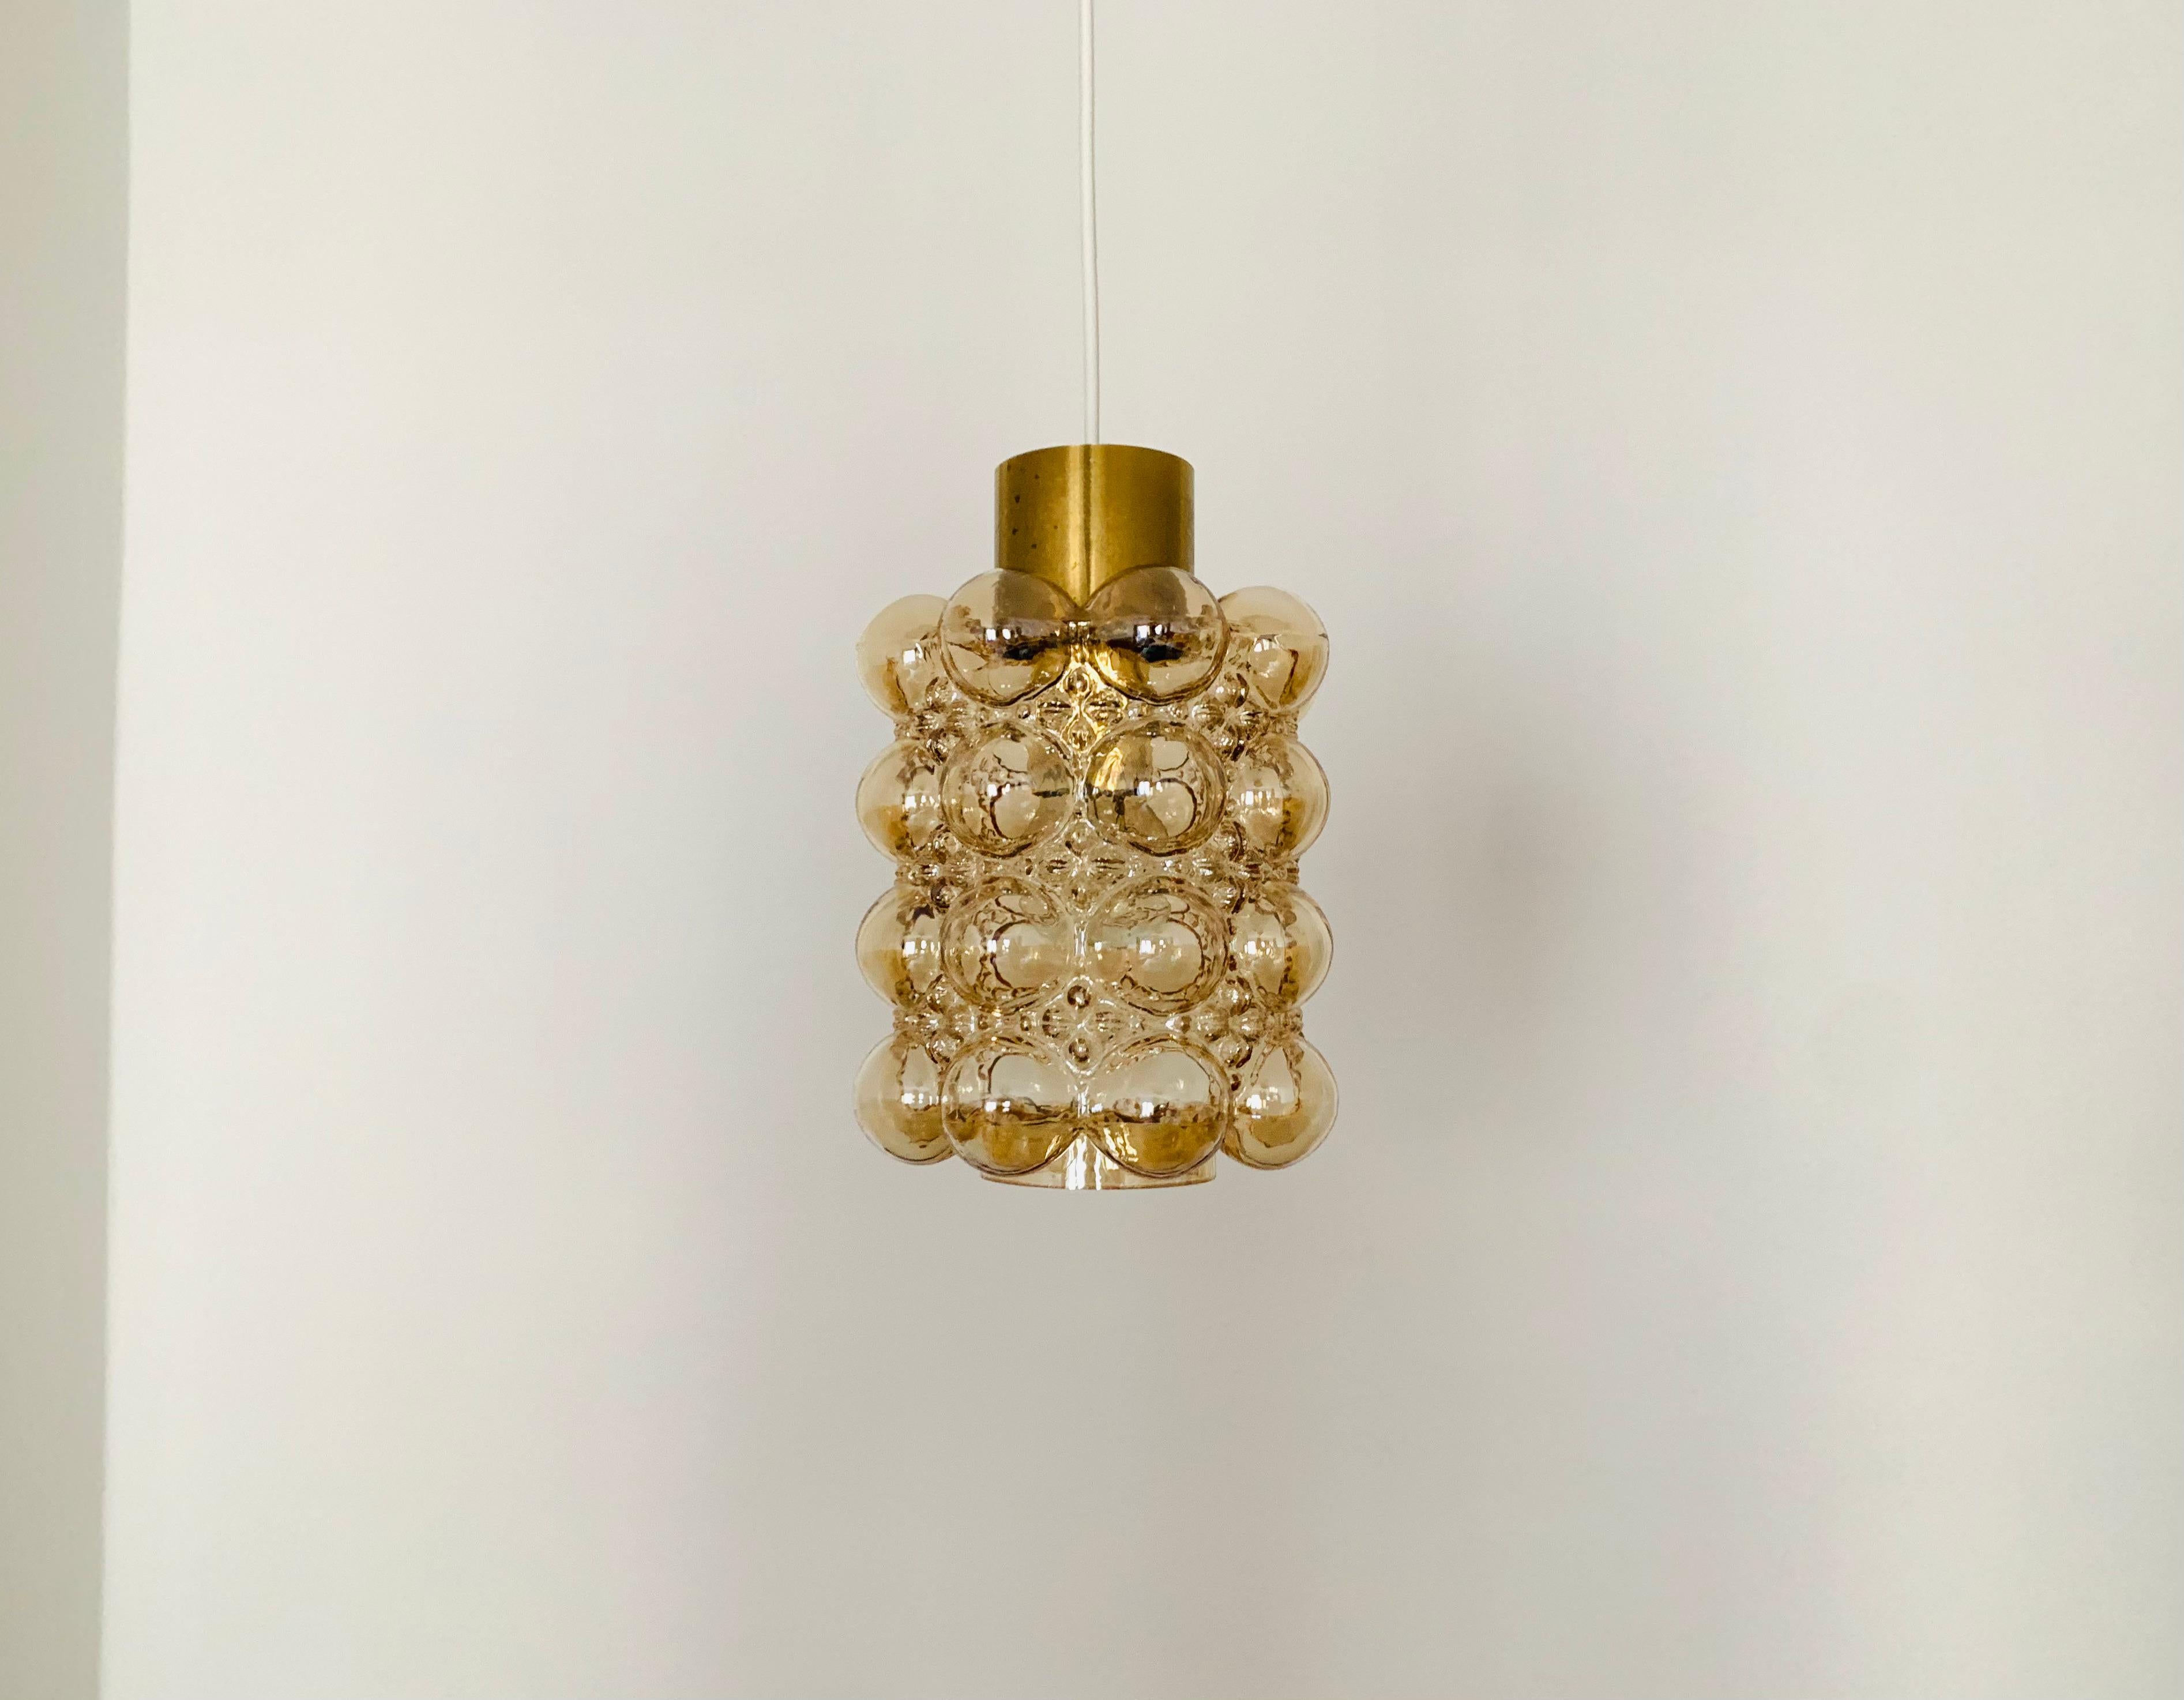 Very nice bubble glass pendant lamp by Helena Tynell for the Limburg glassworks.
The lamp spreads a spectacular play of light in the room and enchants with its charisma.
Great high-quality workmanship and extraordinary design.

Design: Helena